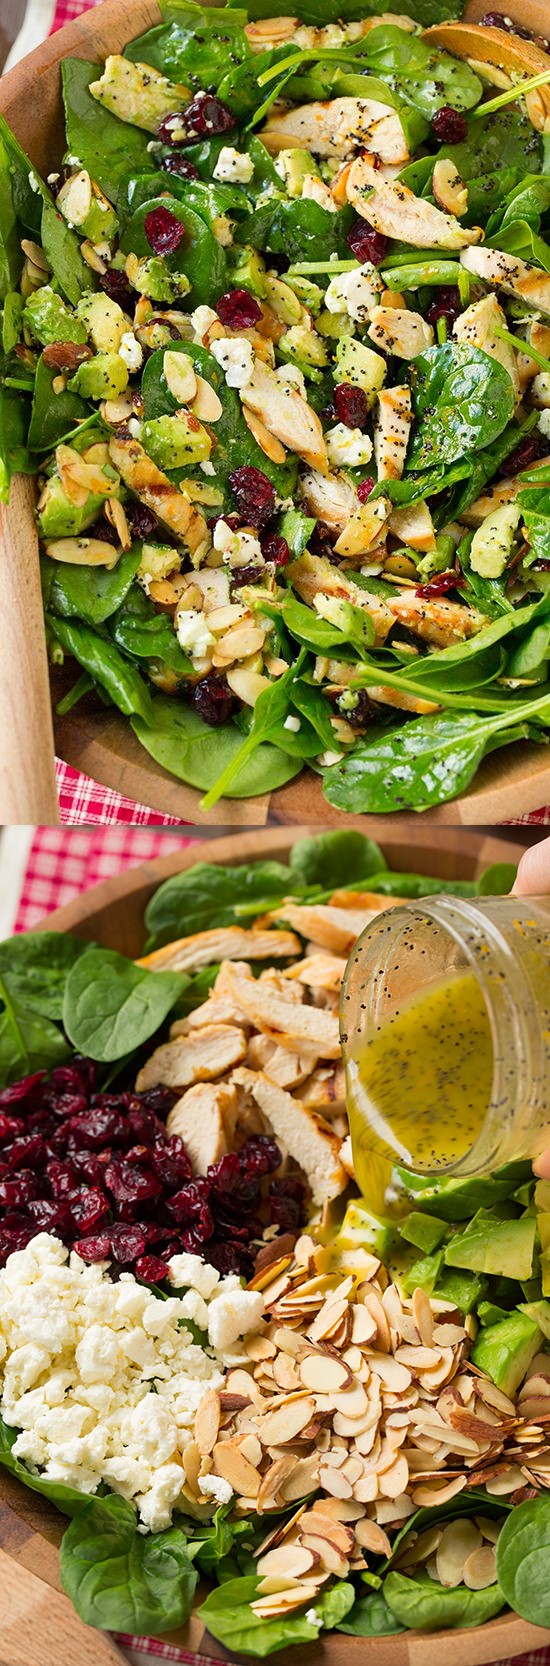 Cranberry Avocado Spinach Salad with Chicken and Orange Poppy Seed Dressing